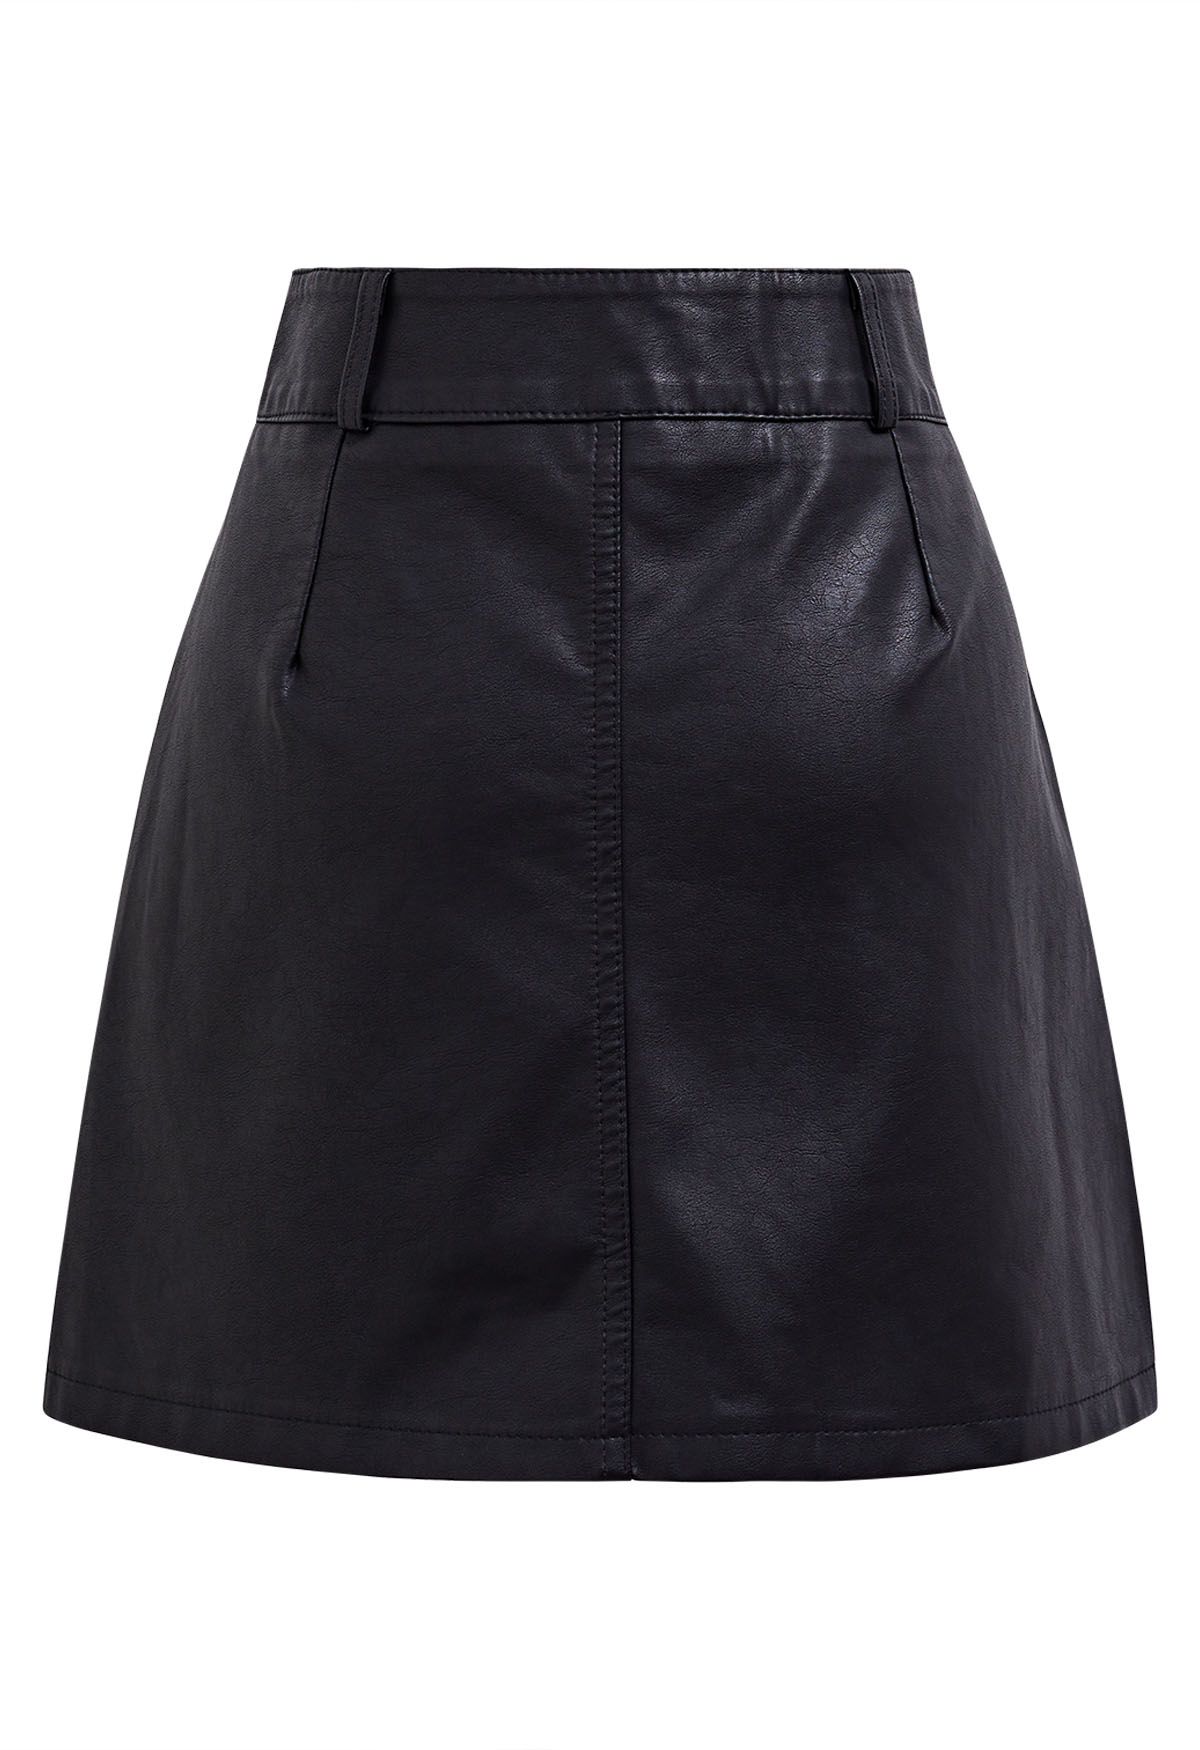 Patch Pocket Faux Leather Mini Skirt in Black - Retro, Indie and Unique ...